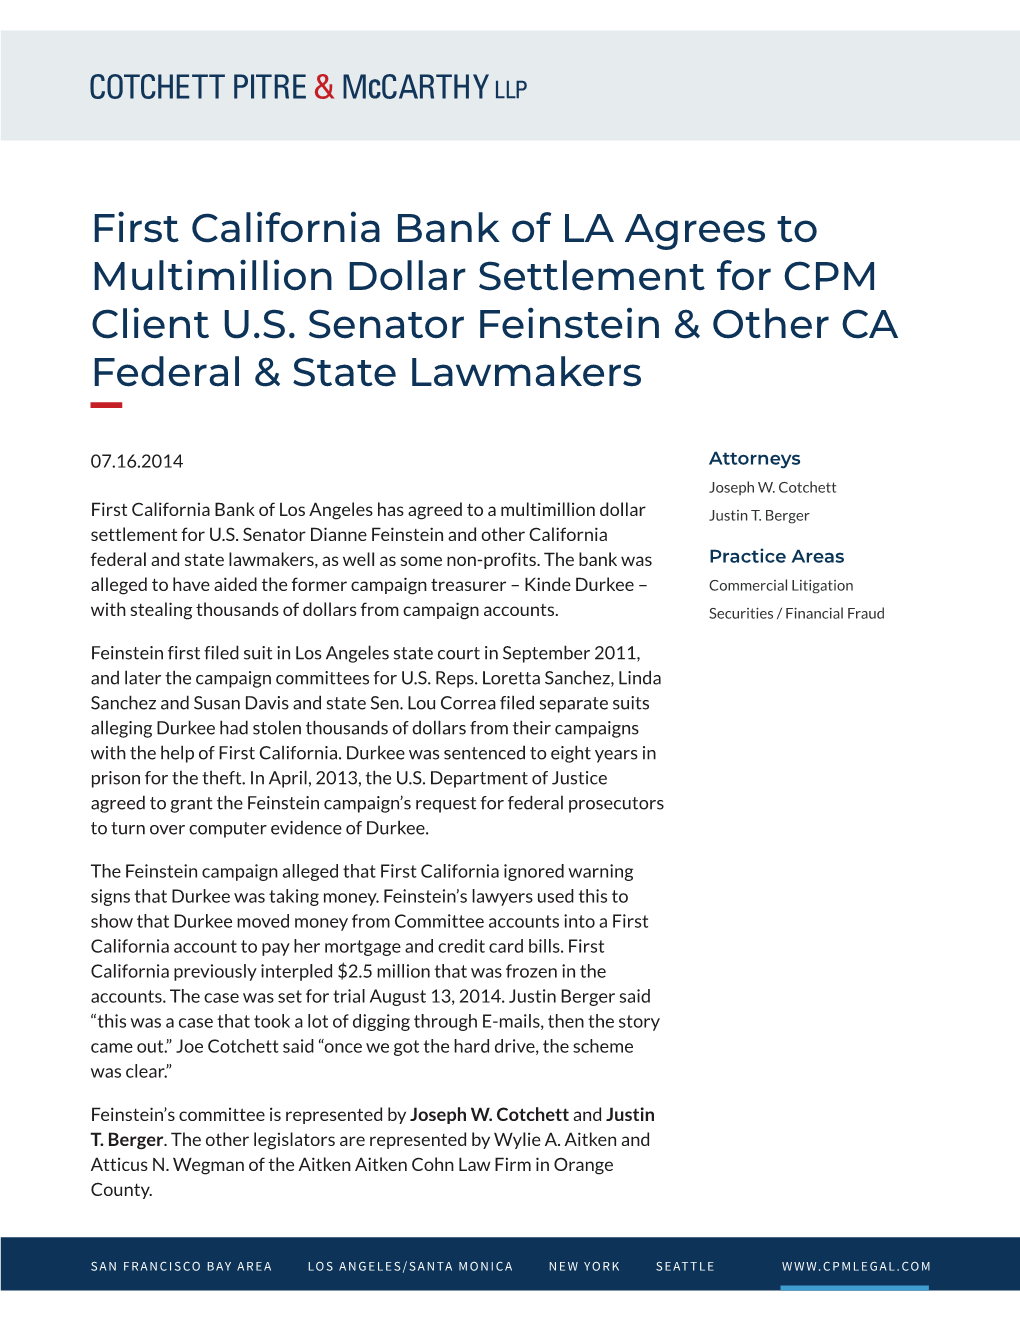 First California Bank of LA Agrees to Multimillion Dollar Settlement for CPM Client U.S